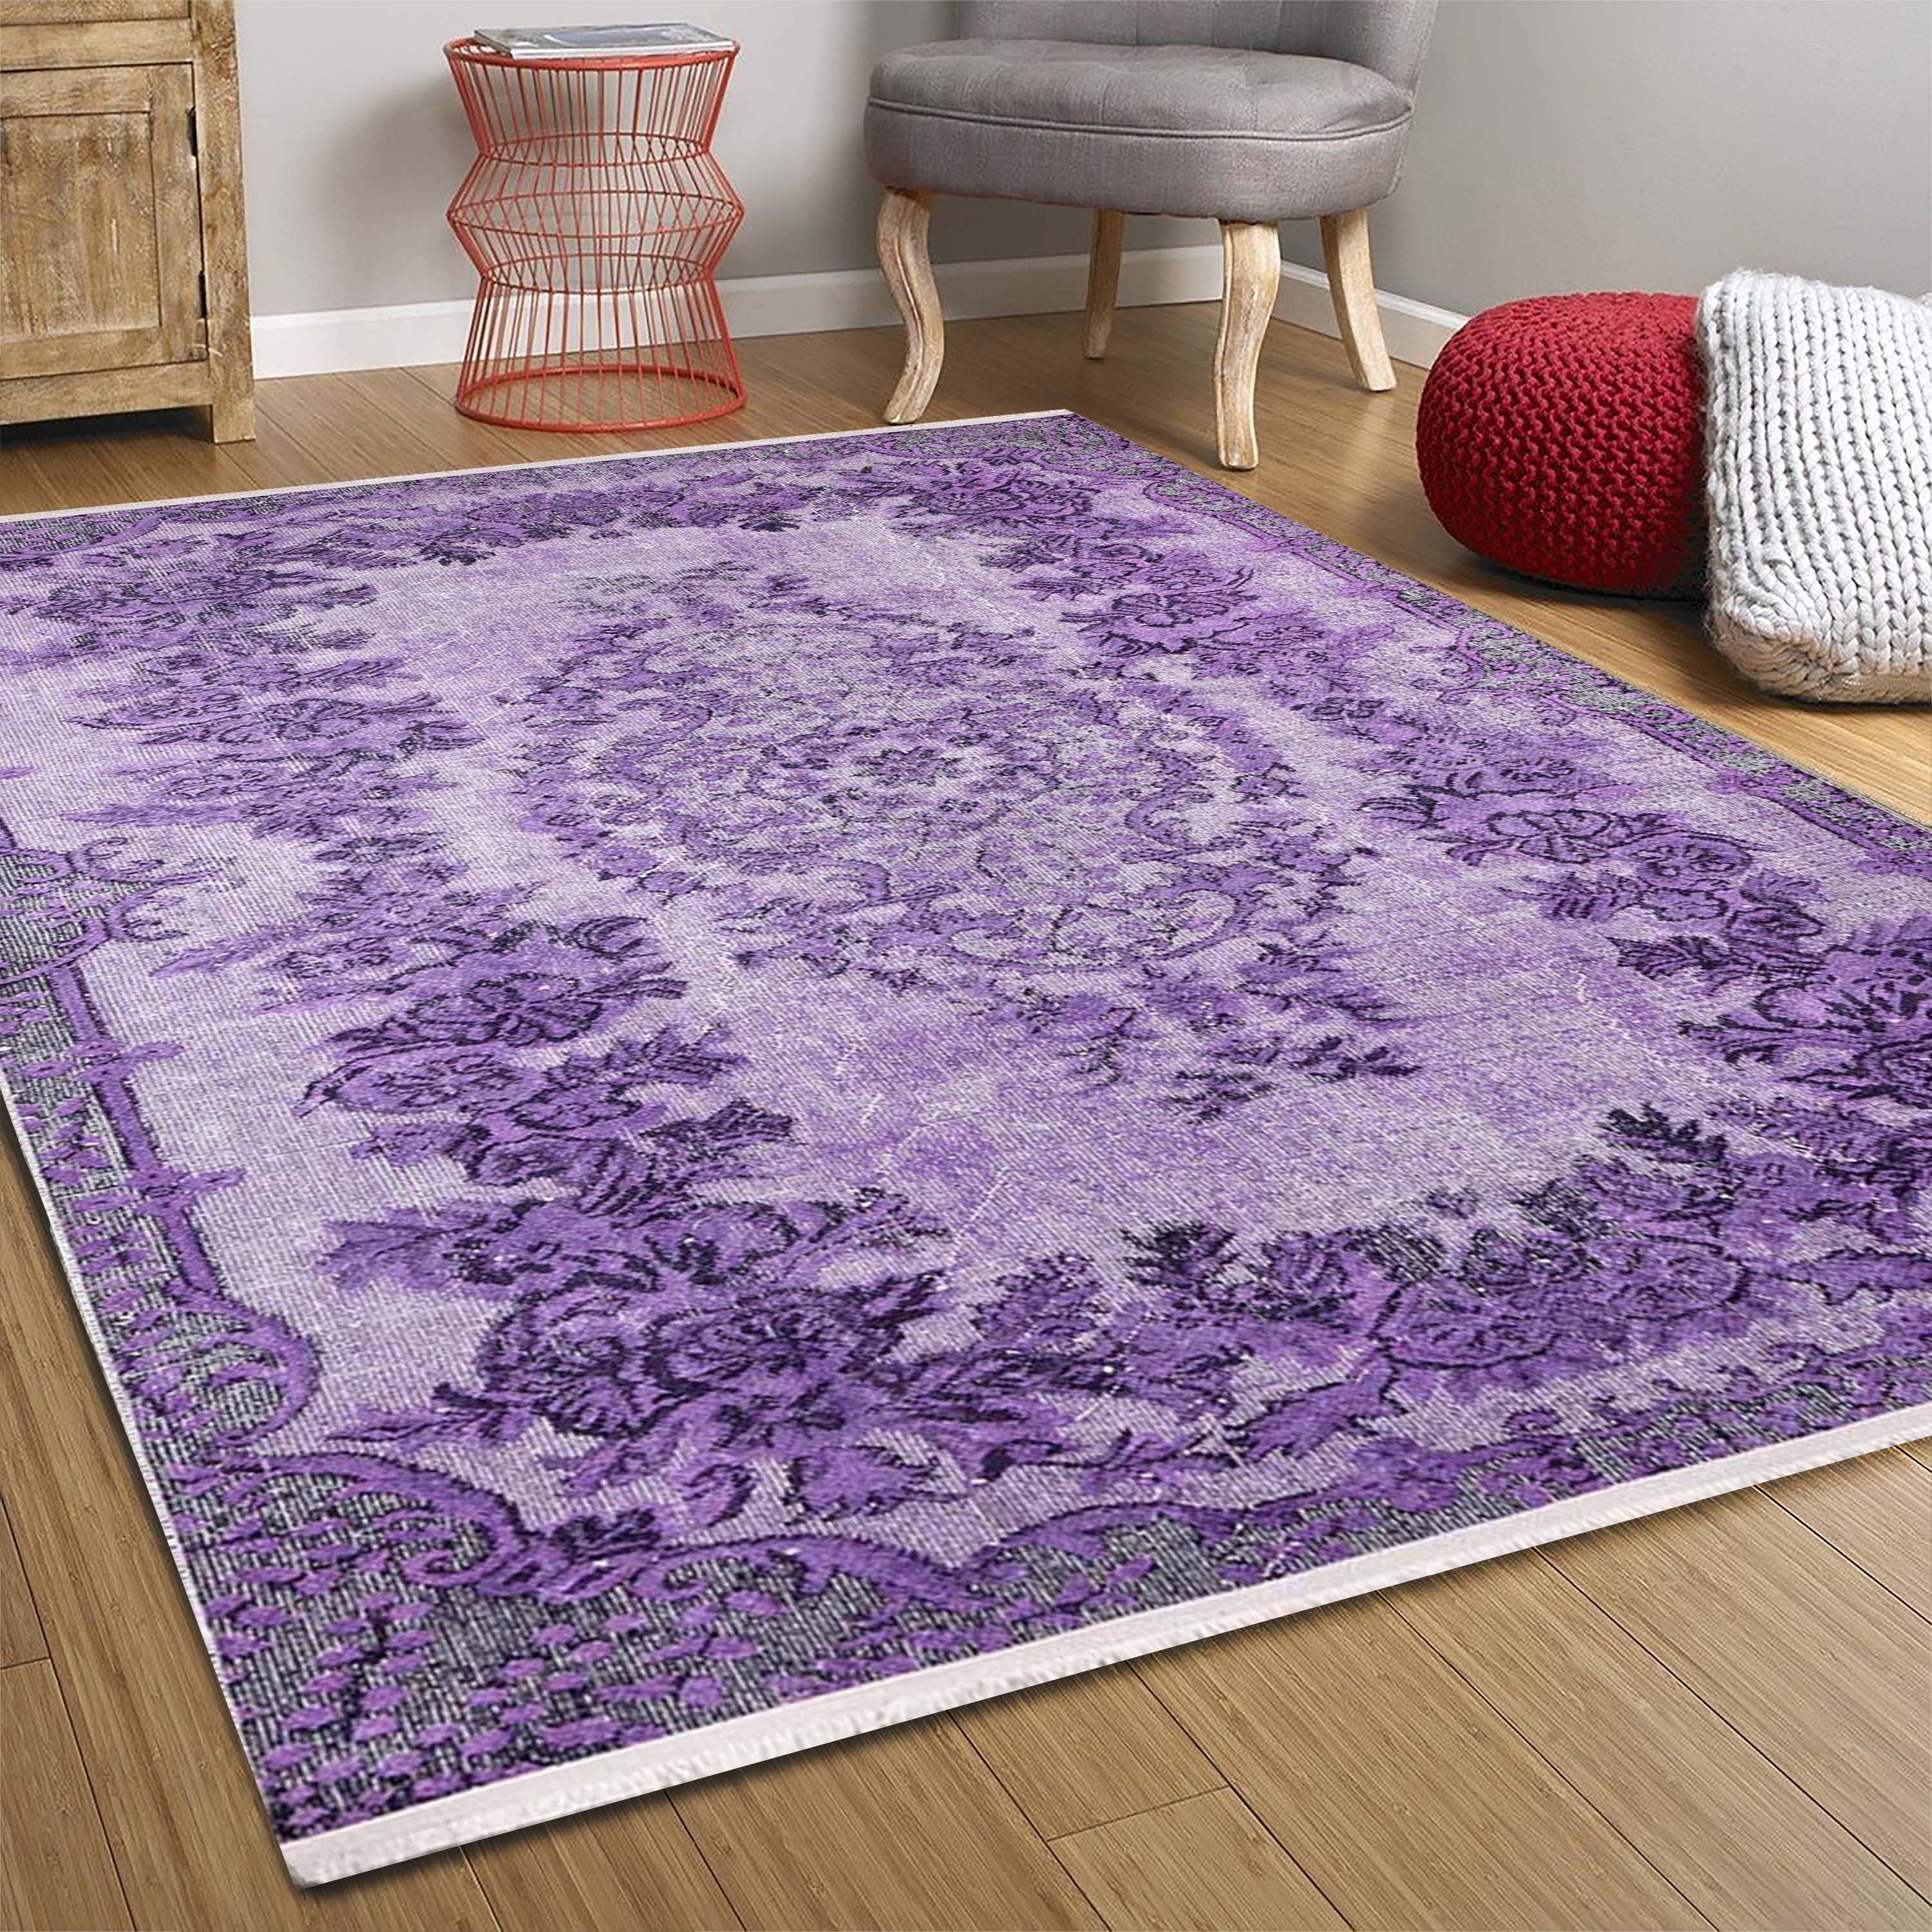 Purple Turkish Rug Distressed Faded Area Rugs 10x13 9x12 8x10 – Etsy Intended For Purple Rugs (View 9 of 15)